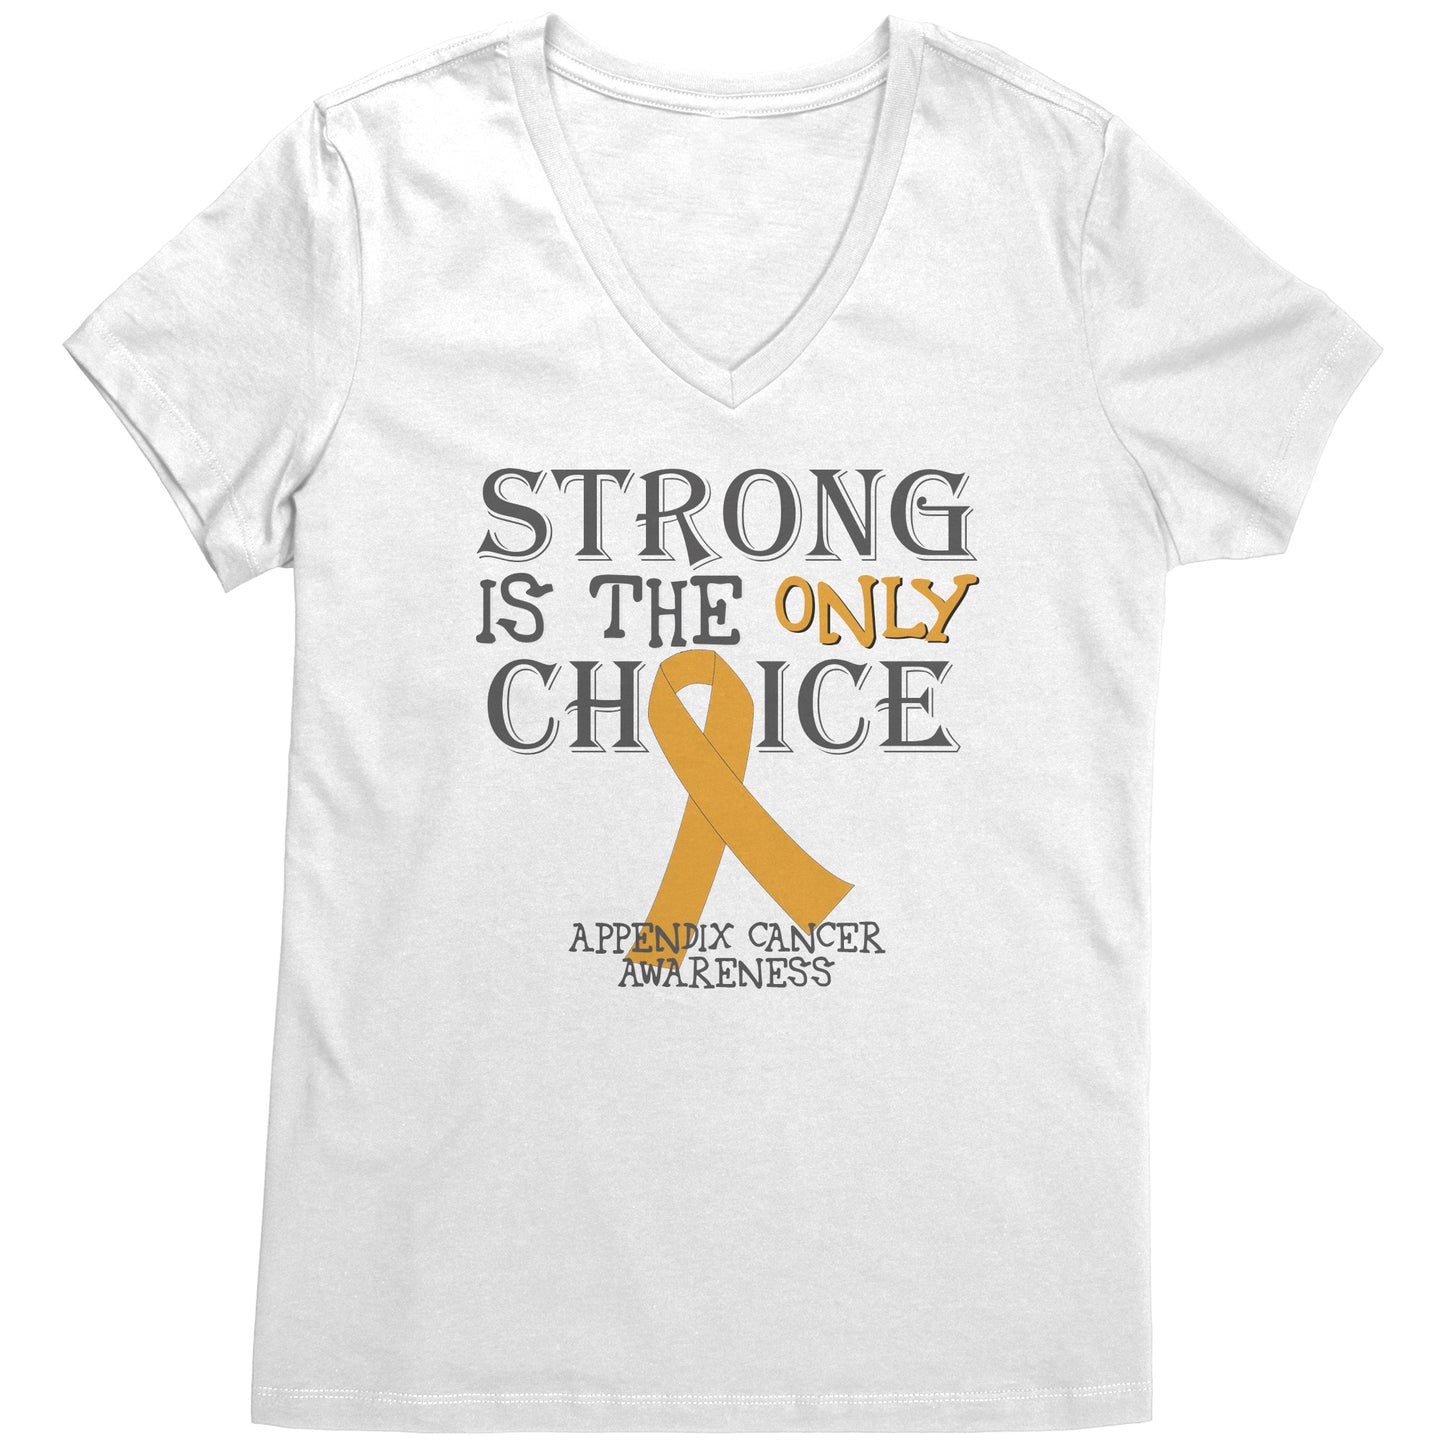 Strong is the Only Choice -Appendix Cancer Awareness T-Shirt, Hoodie, Tank